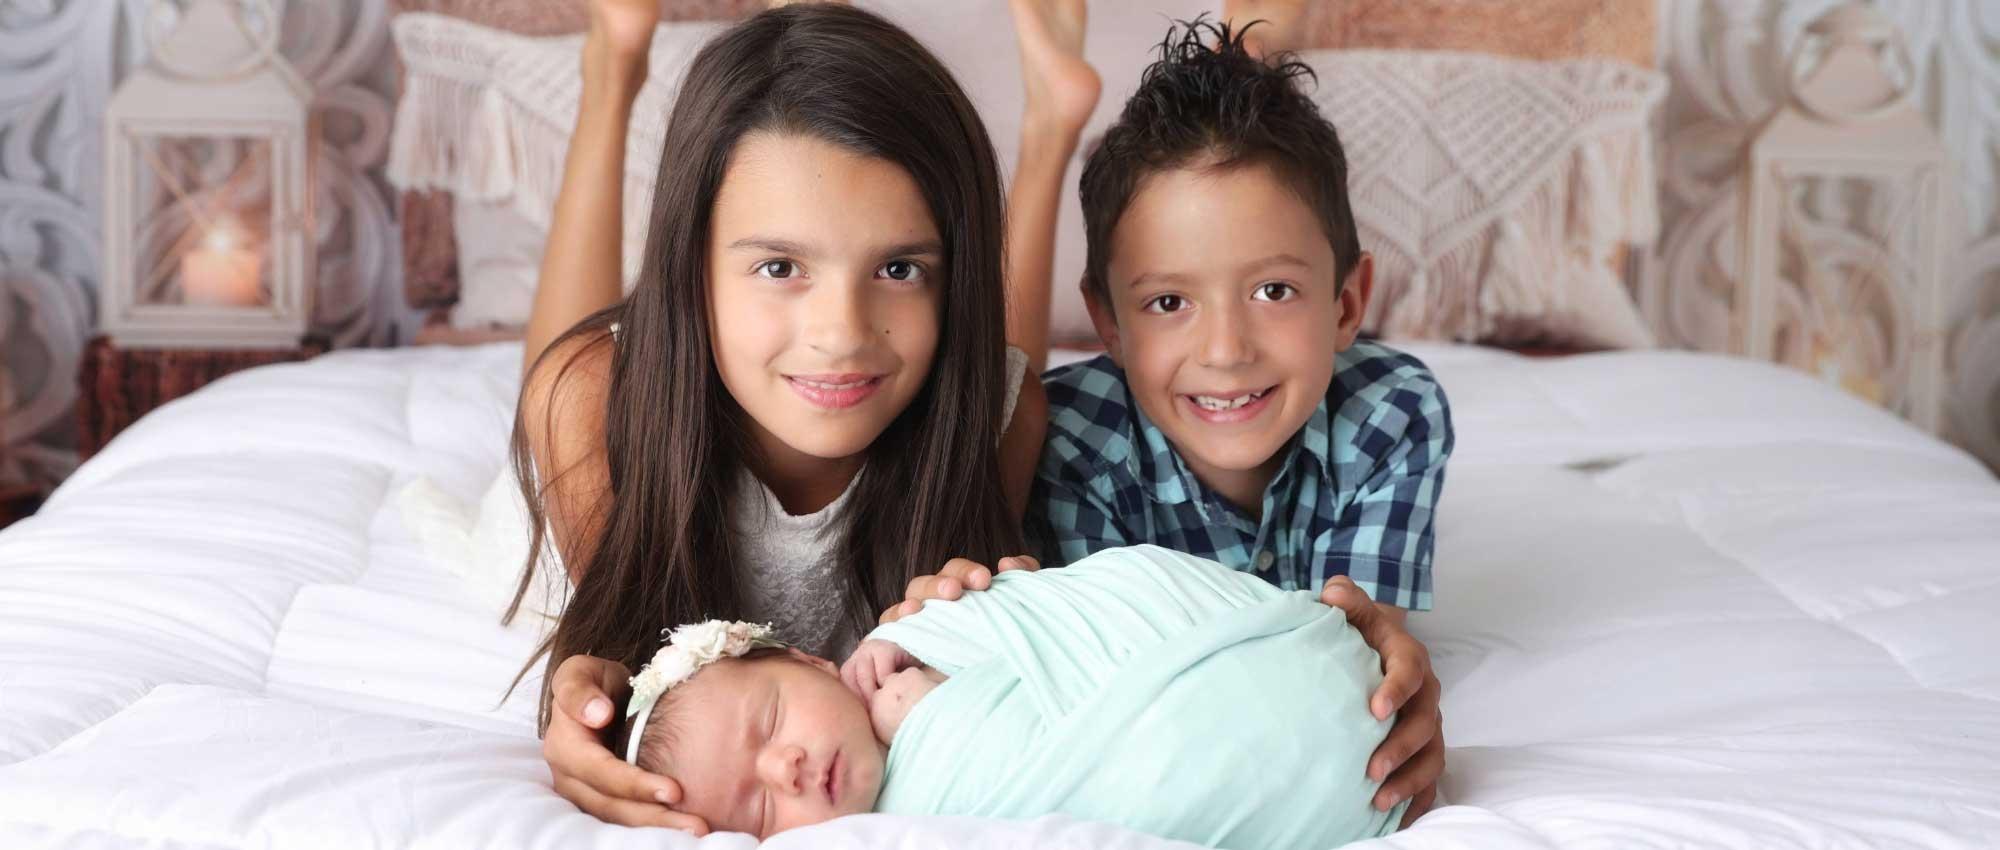 Two children pose with their baby sister